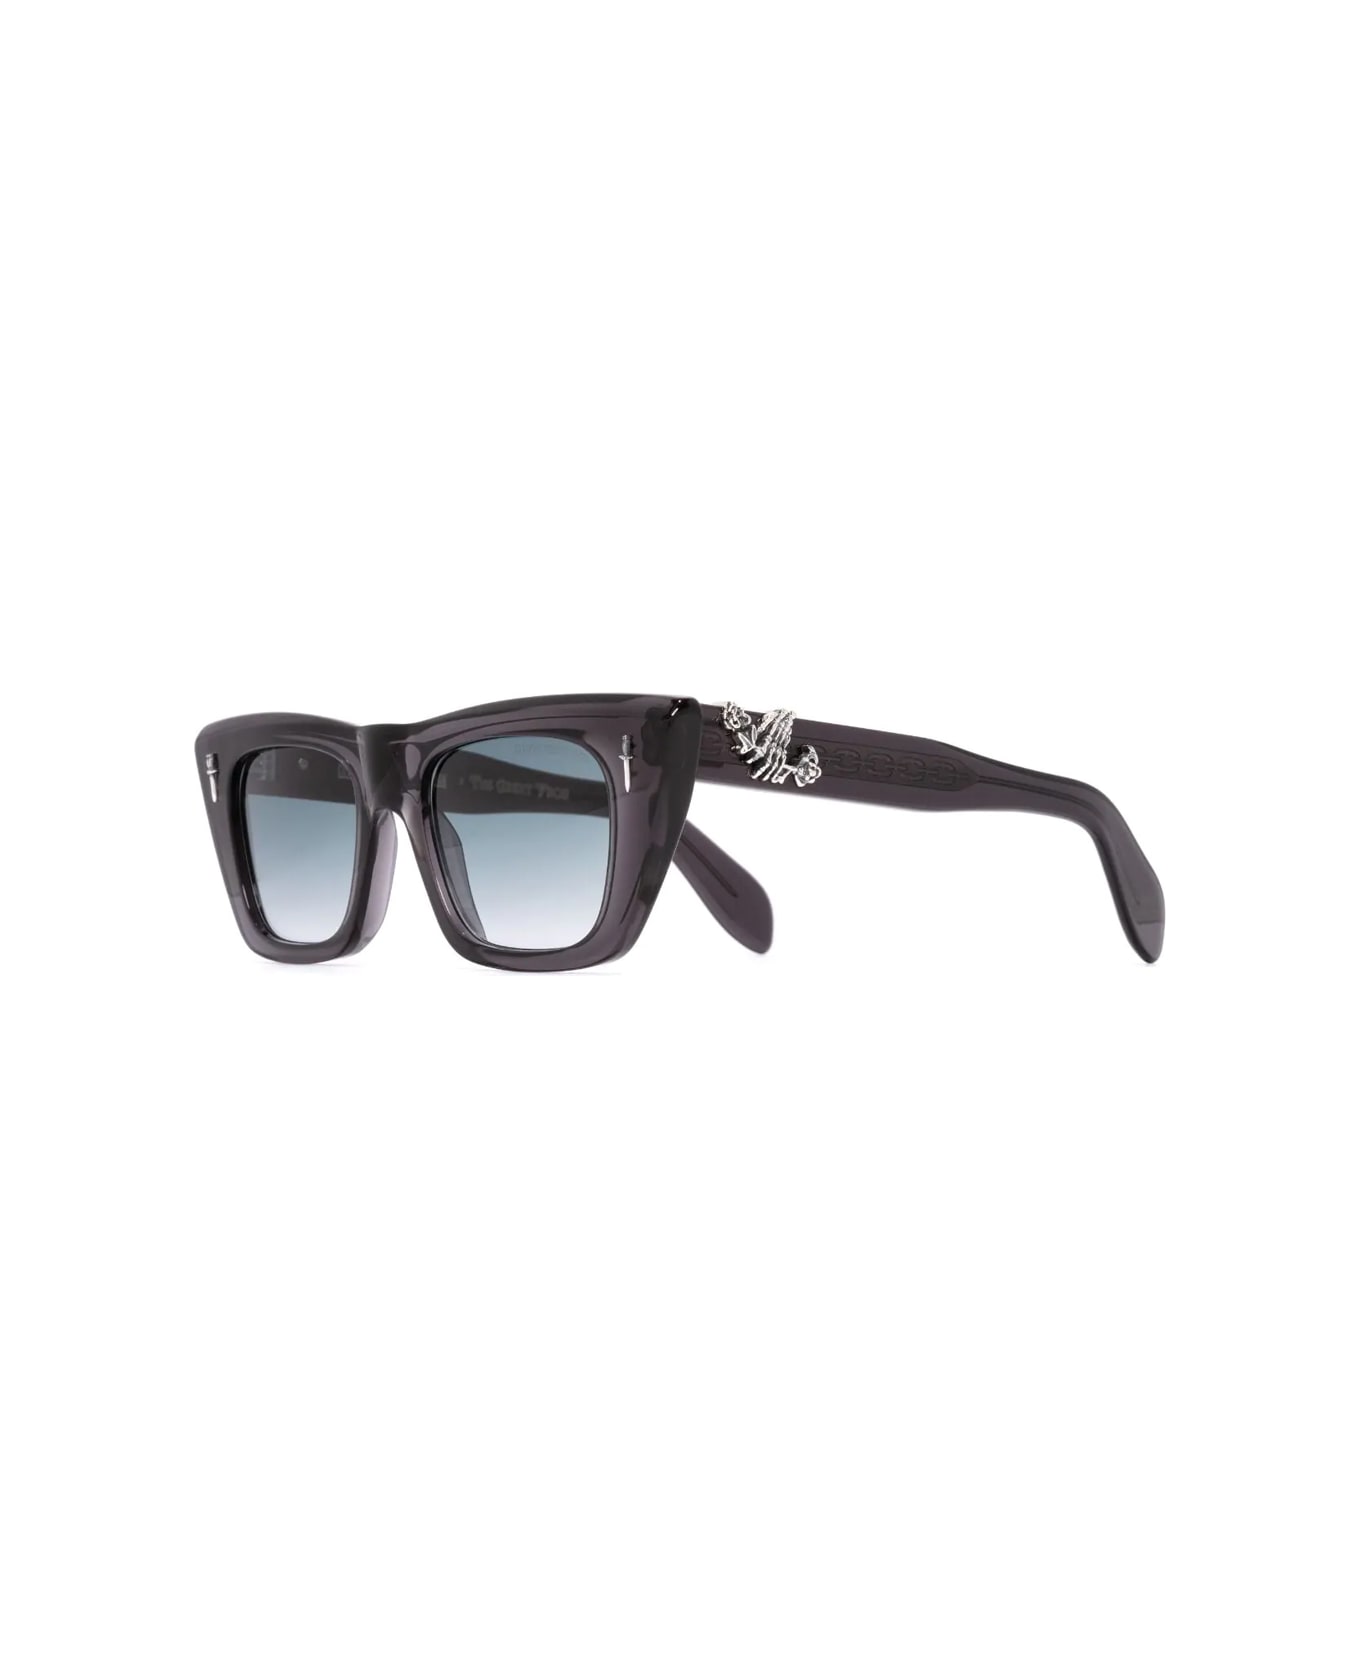 Cutler and Gross The Great Frog 008 03 Sunglasses - Grigio サングラス